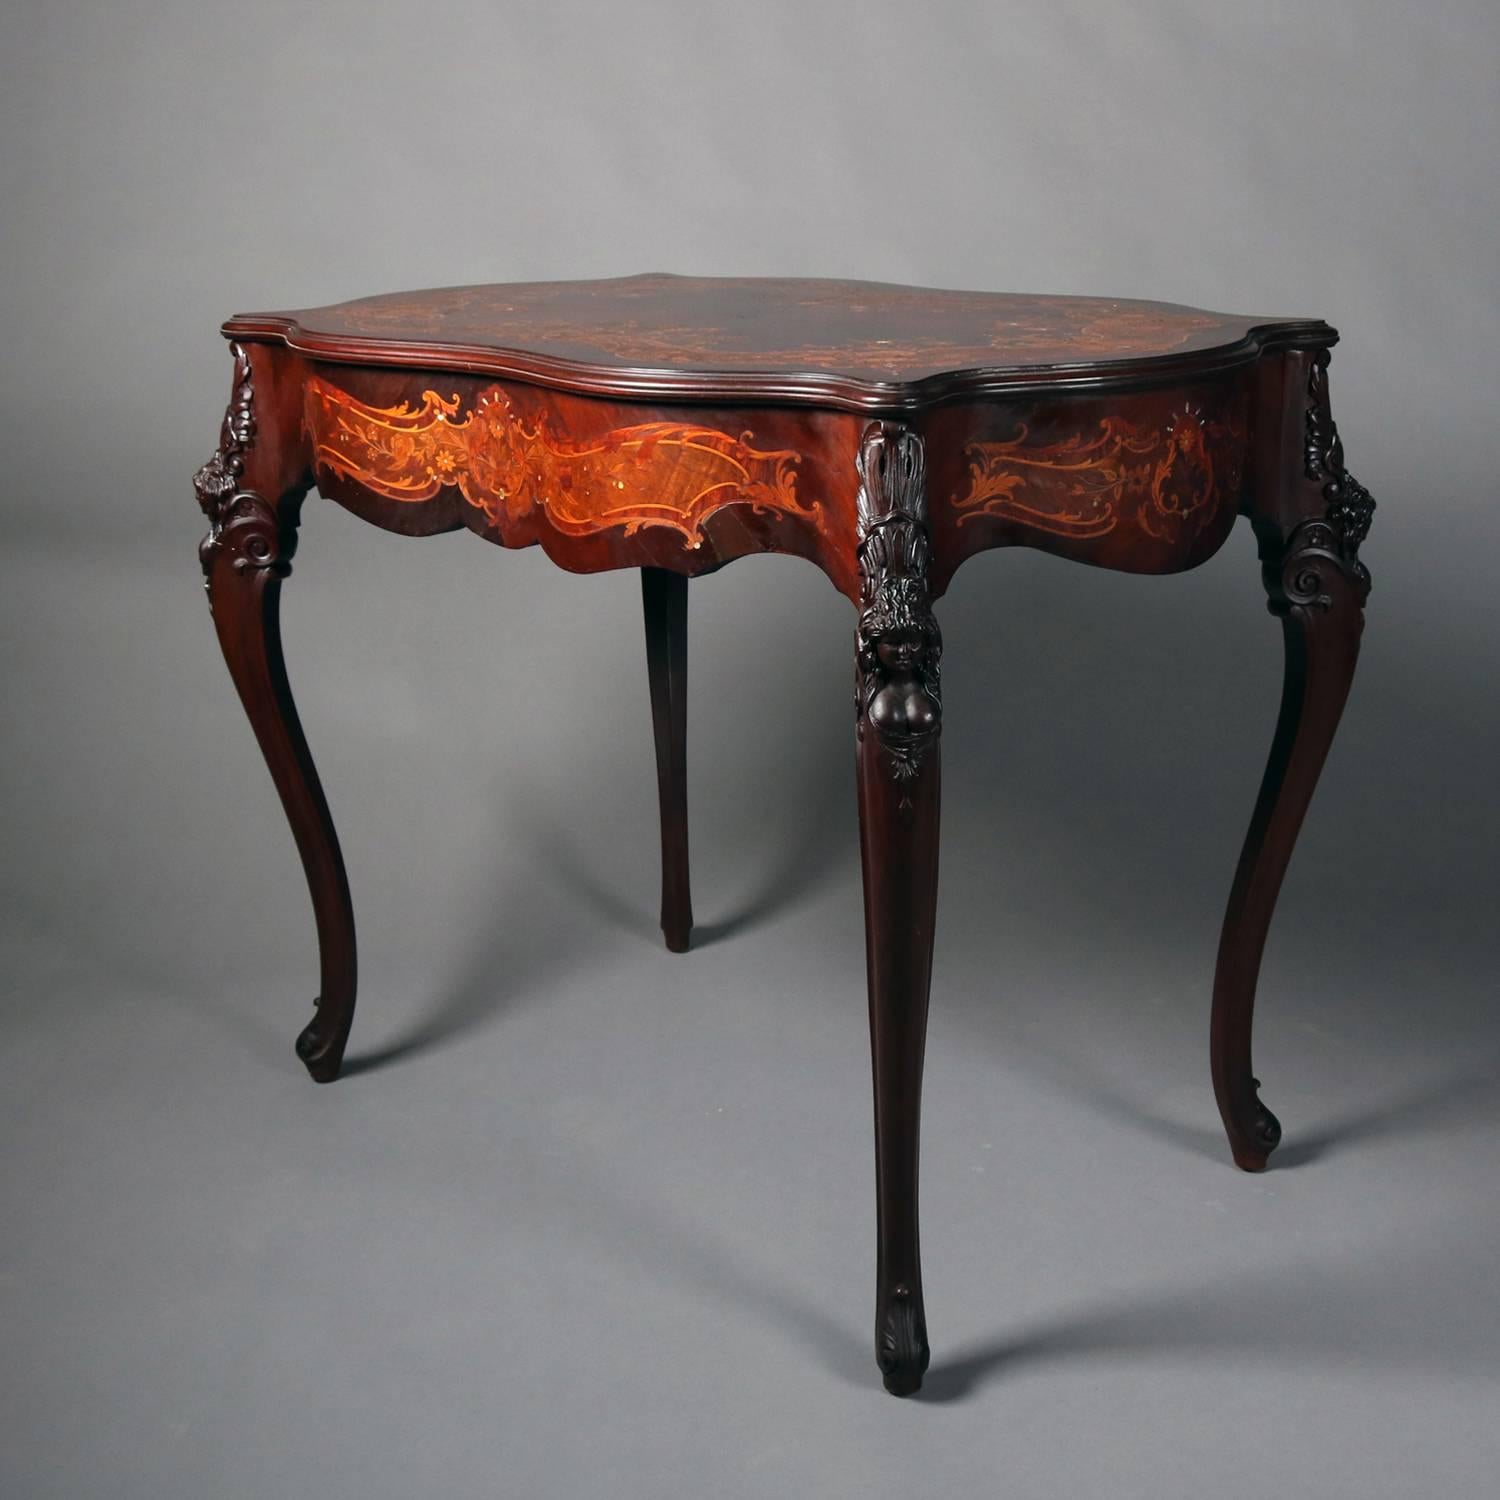 Antique French Louis XV center table features carved mahogany construction with satinwood and mother of pearl floral marquetry inlay, scalloped edges and seated on carved cabriole legs, 19th century

Measures - 30